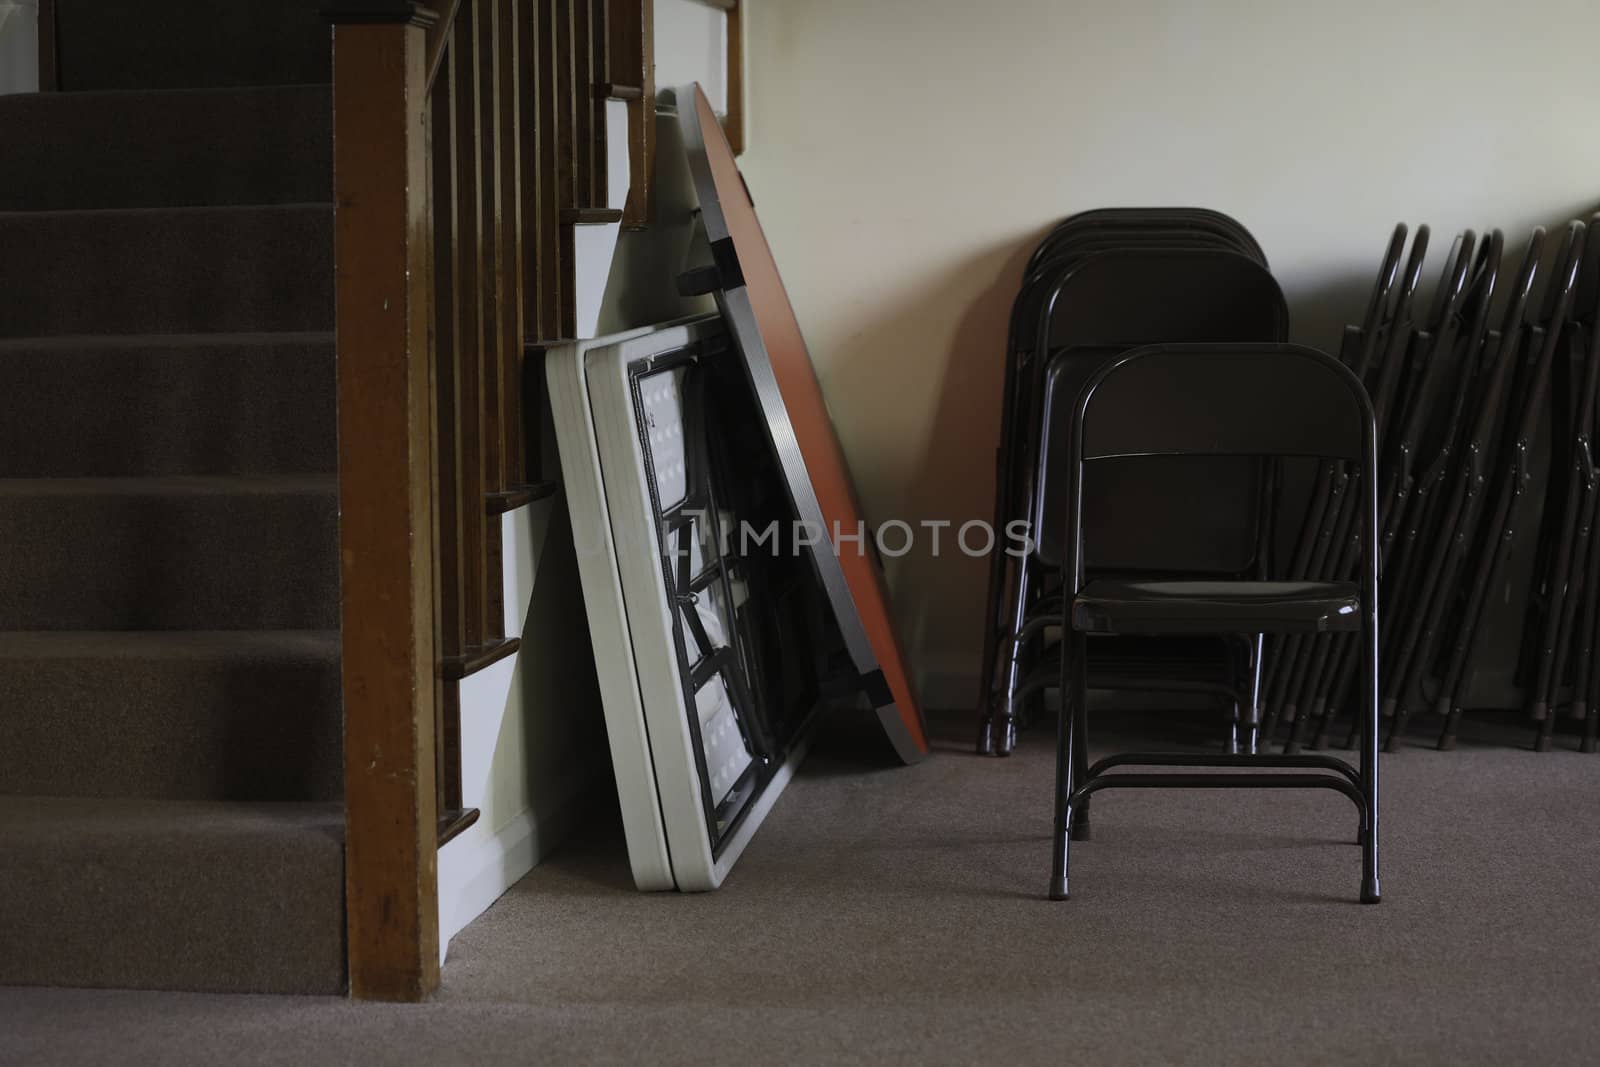 Folding tables and chairs stacked at the bottom of a stairwell in an entertainment venue, meeting hall or school